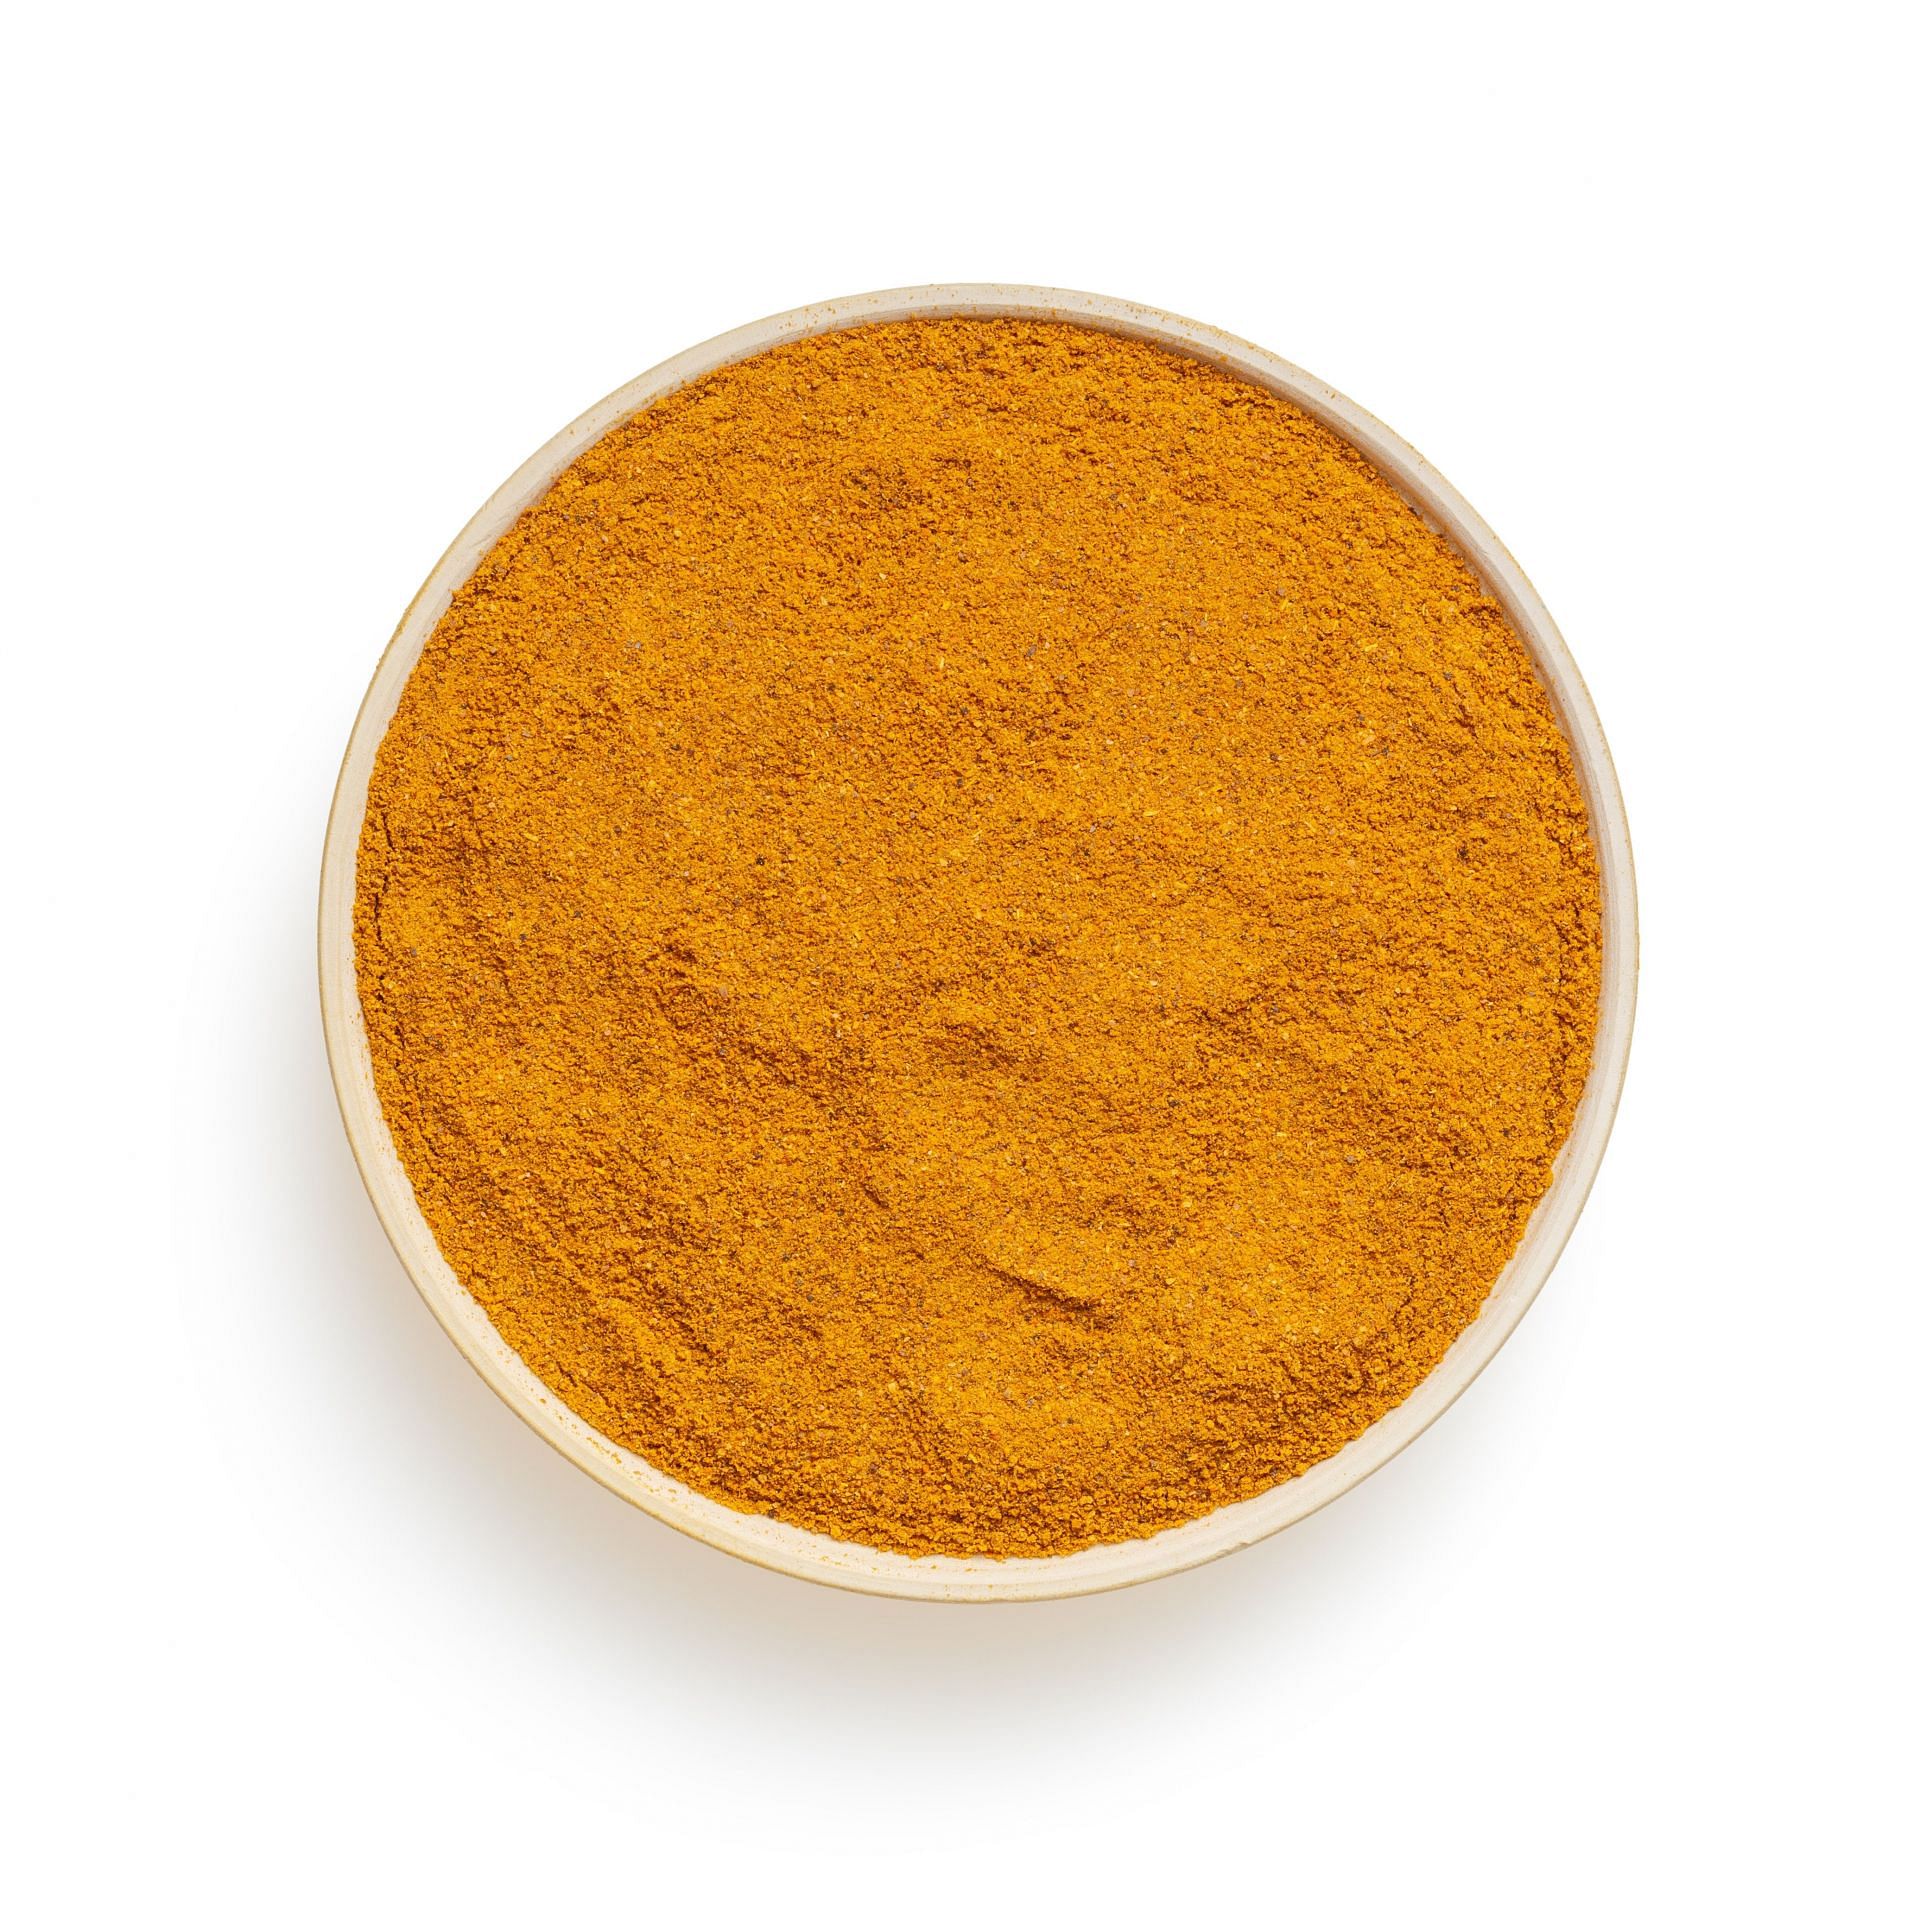 Consuming curcumin is beneficial to health. (image via unsplash / mock-up graphic)